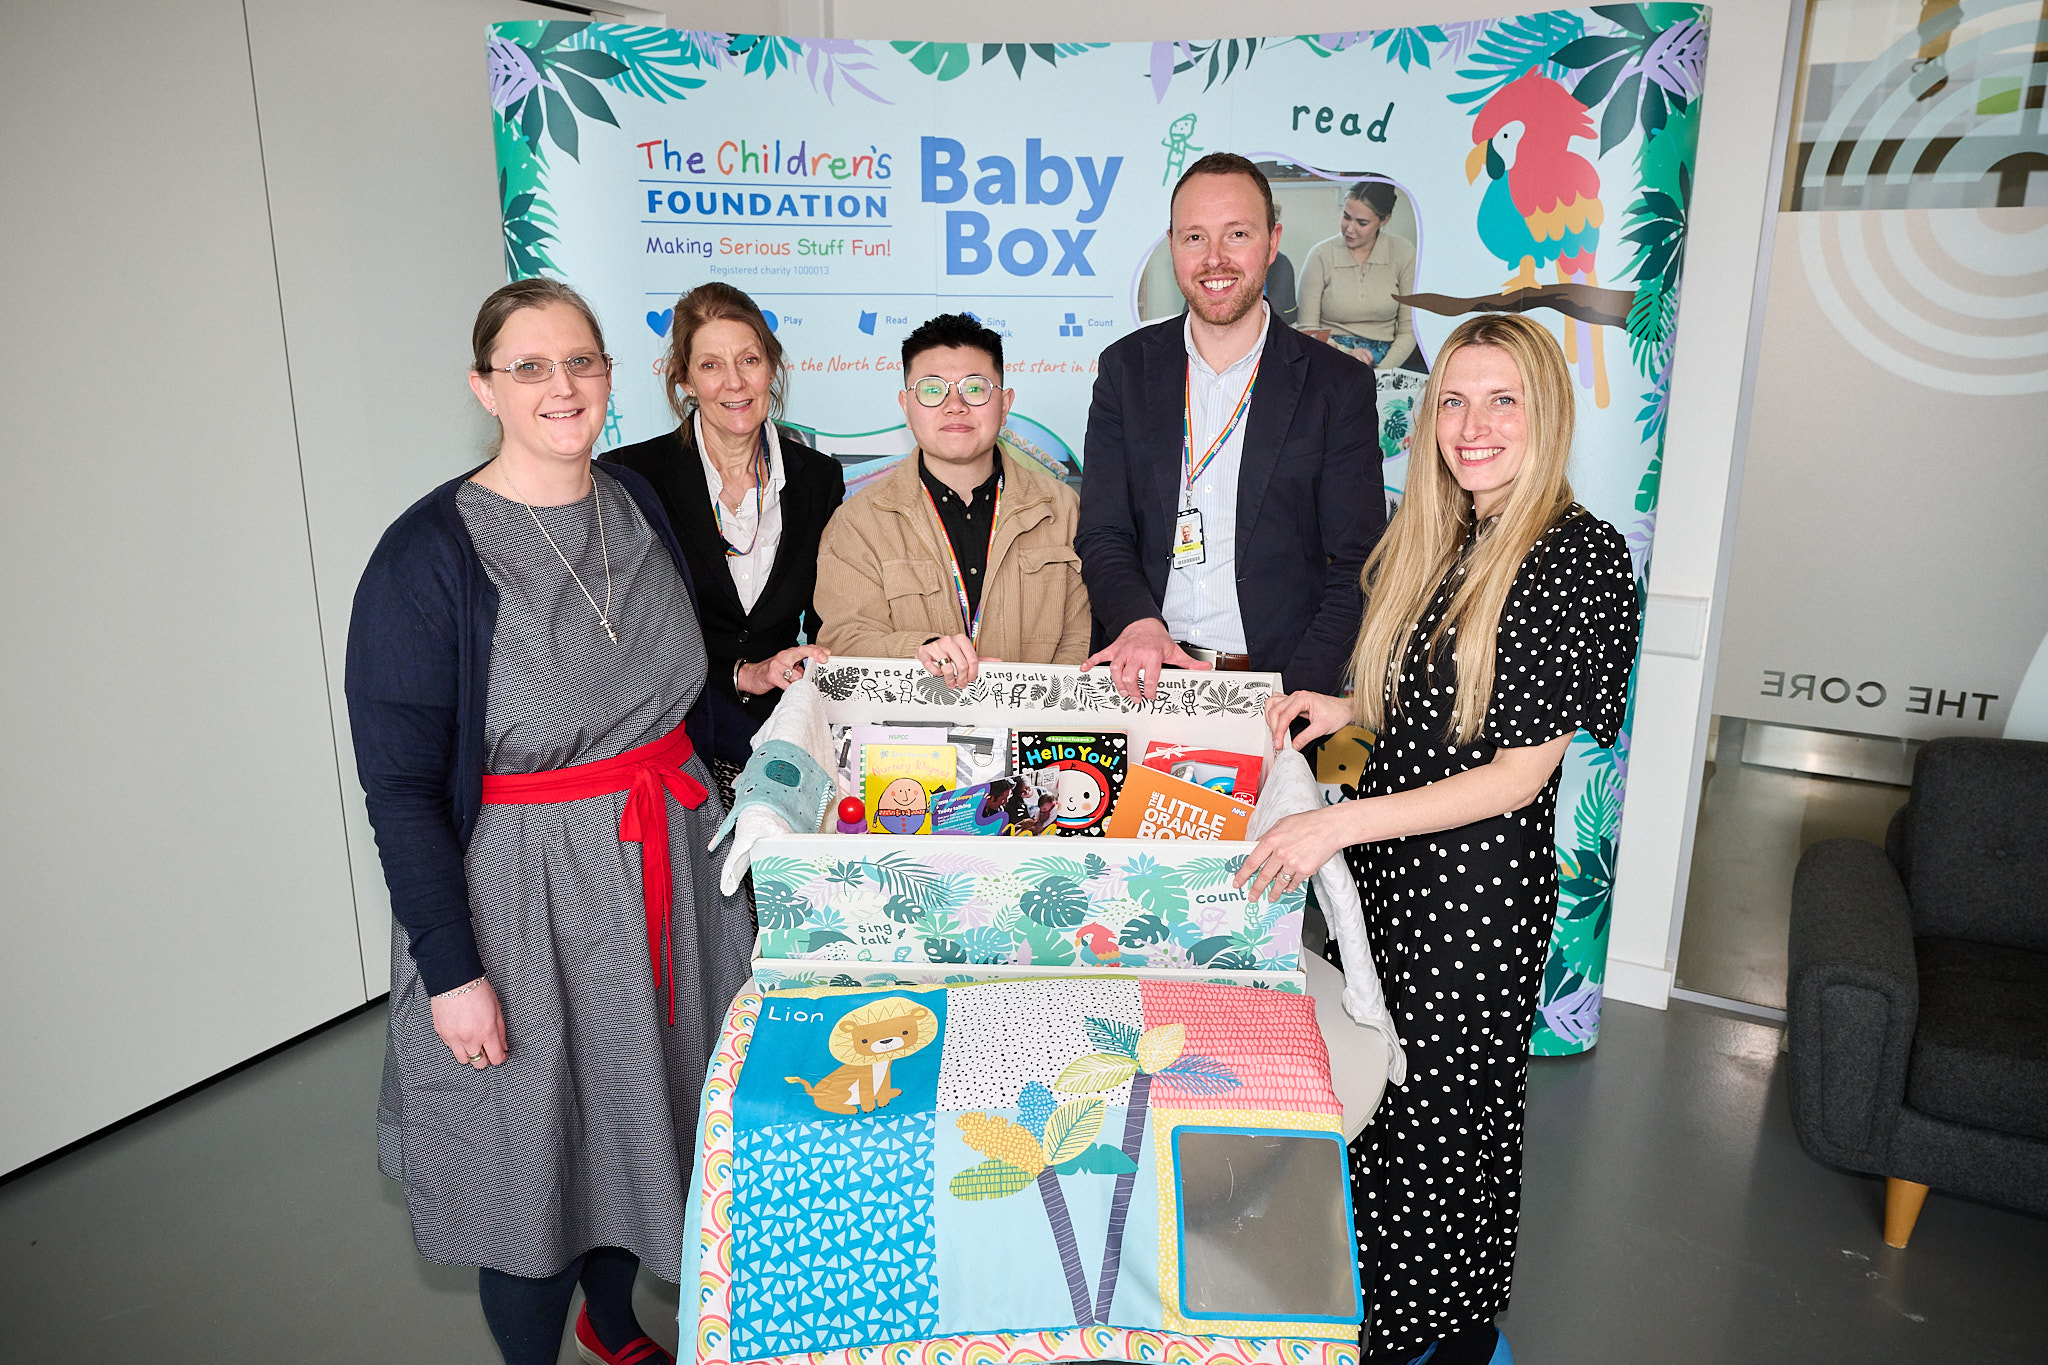 The Baby Box team from The Children's Foundation